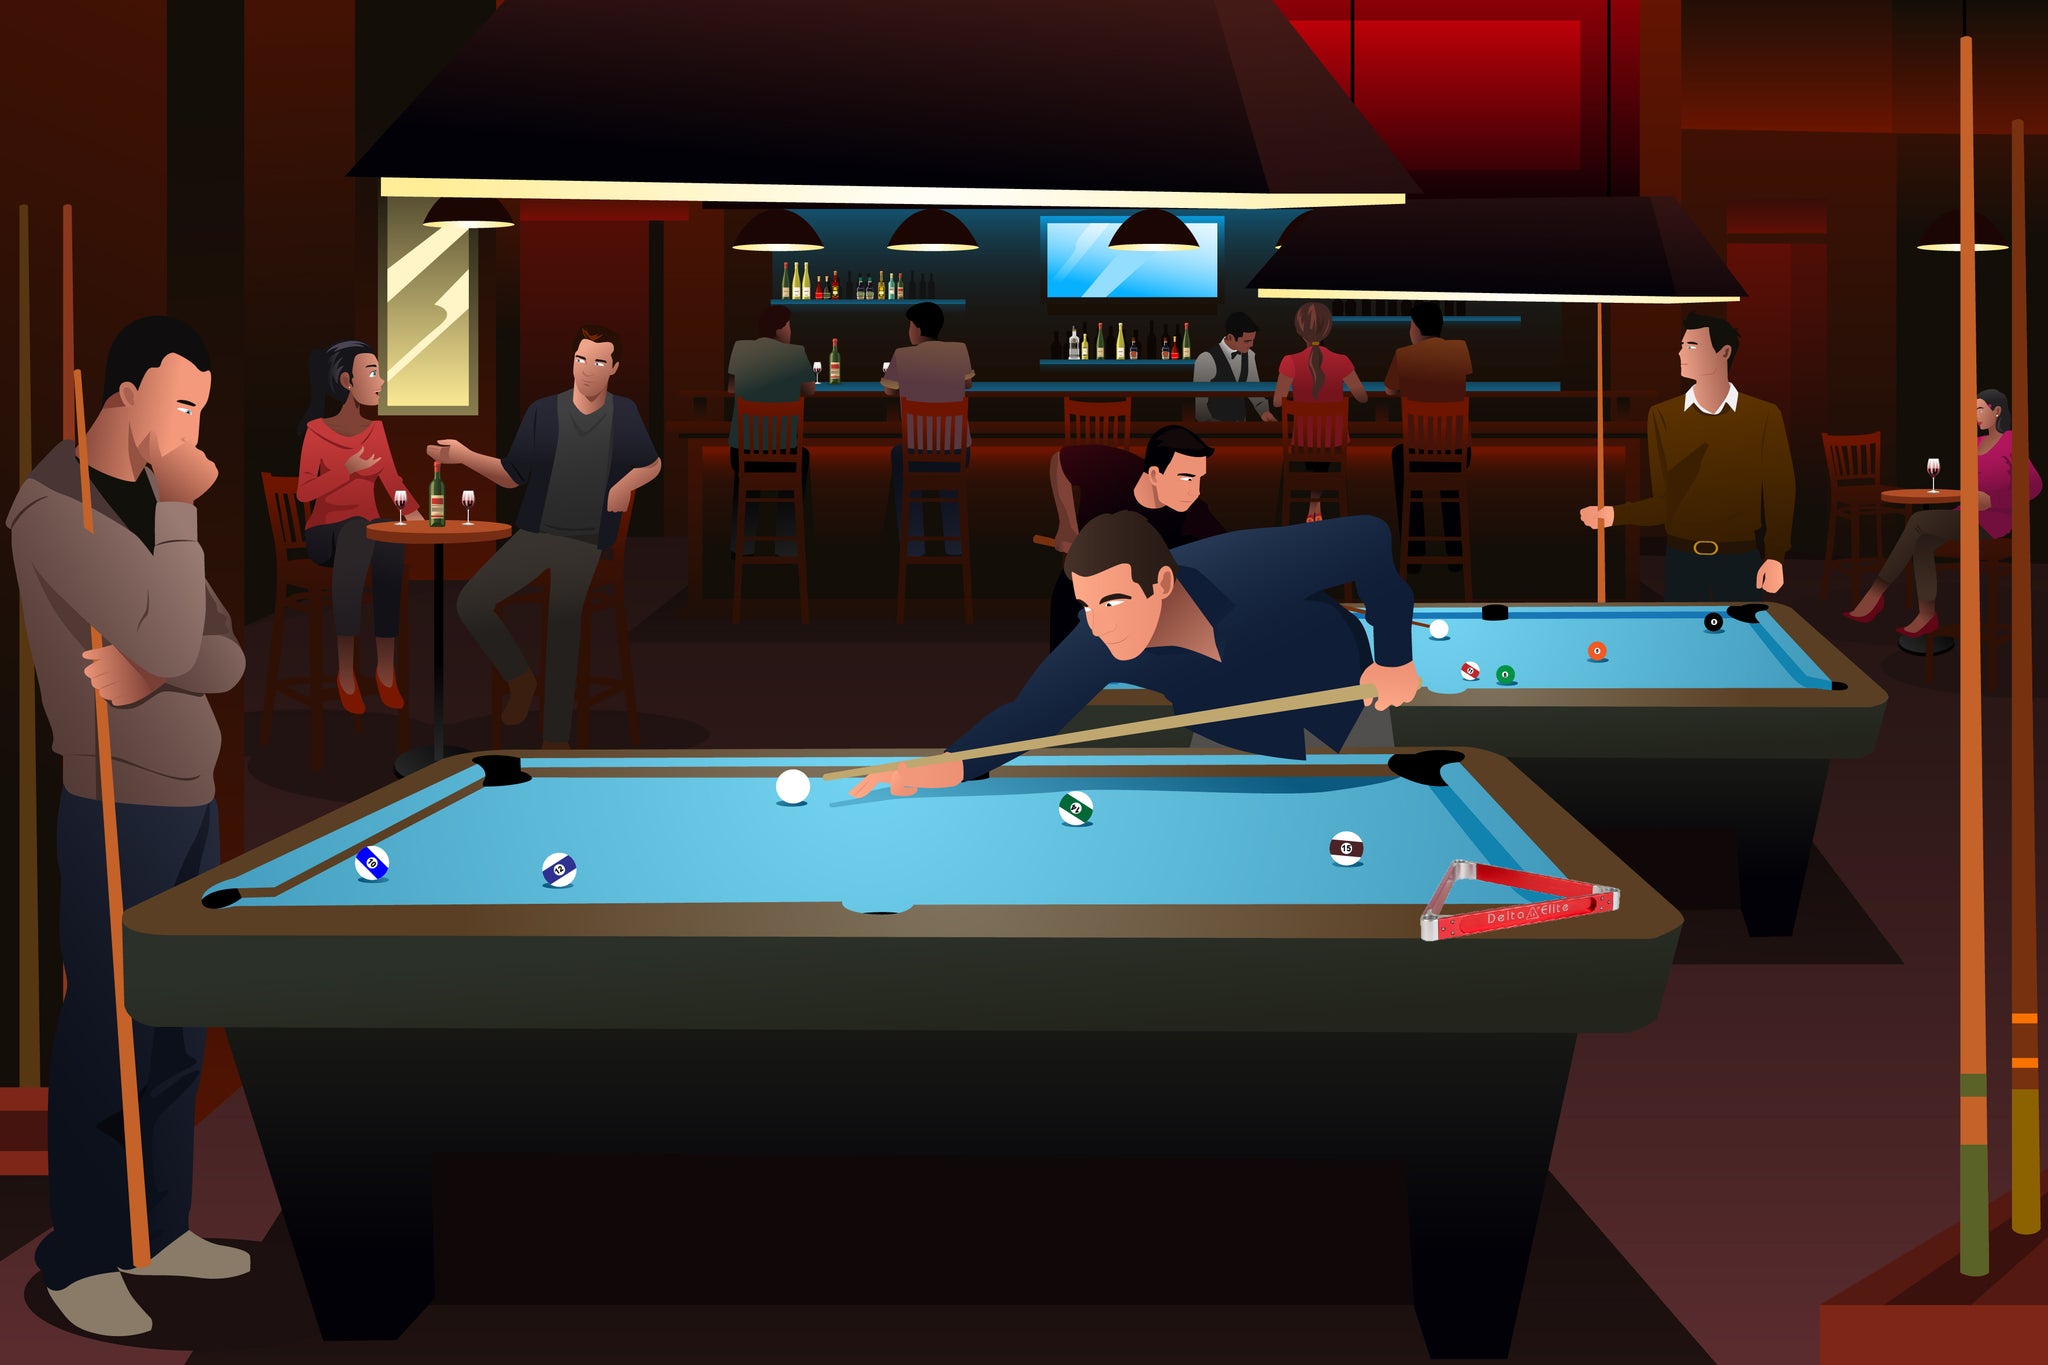 8 ball pool rules – Learn how to play American billiards or pool